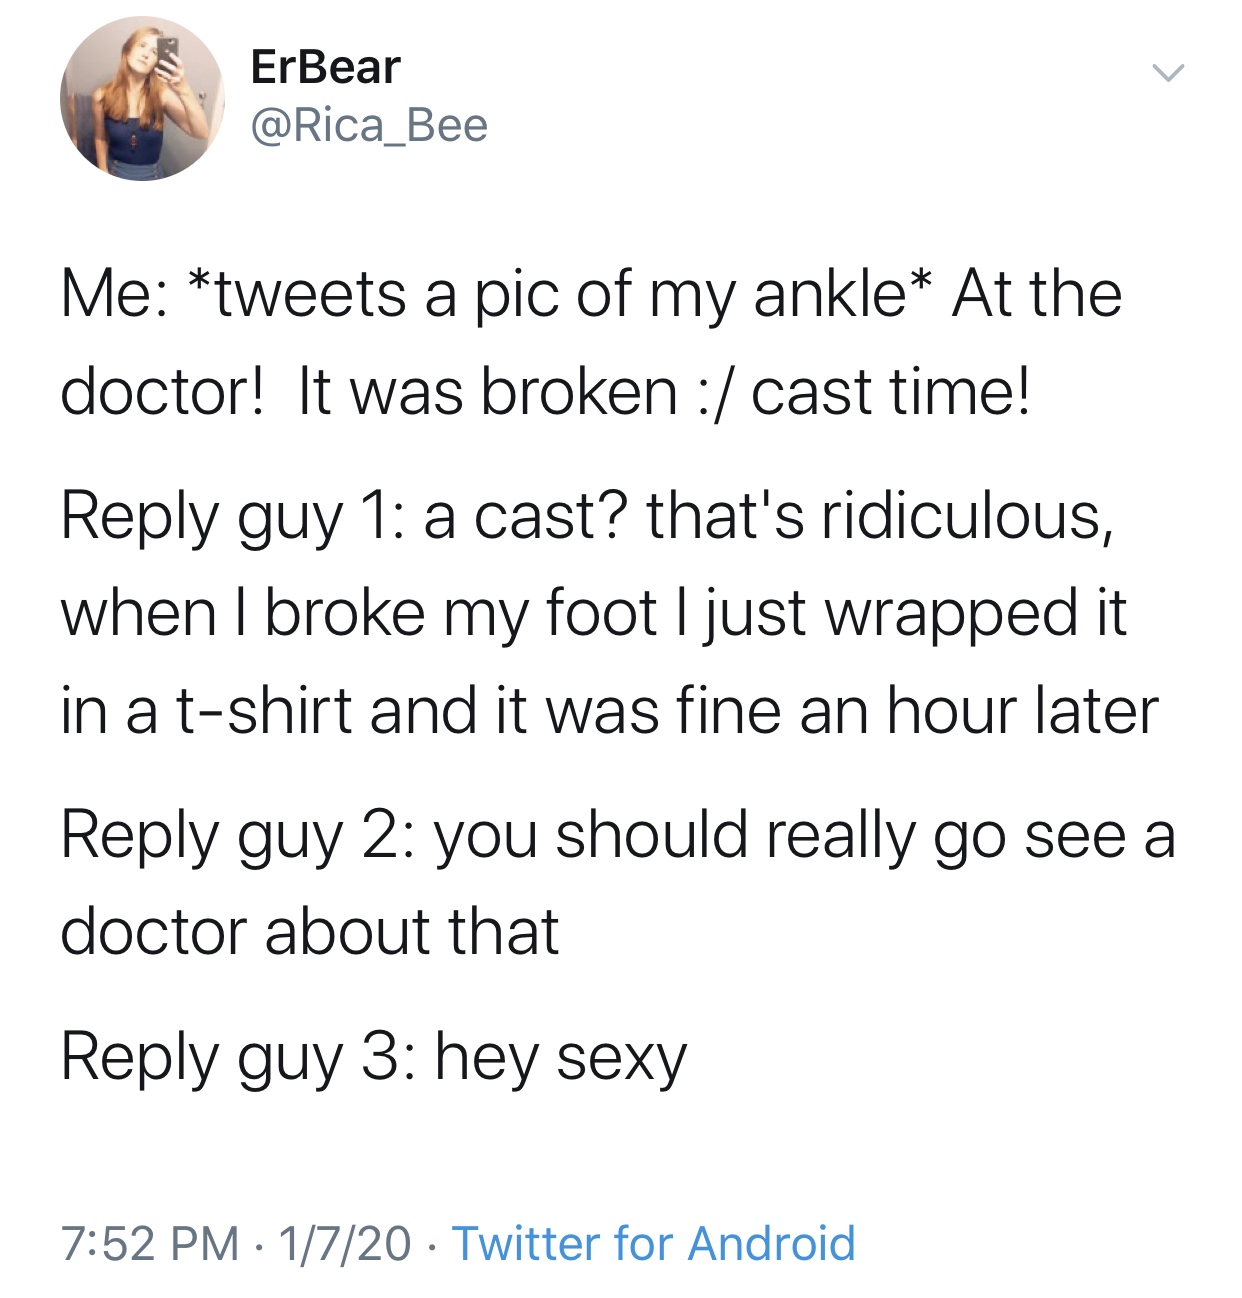 angle - ErBear Me tweets a pic of my ankle At the doctor! It was broken cast time! guy 1 a cast? that's ridiculous, when I broke my foot I just wrapped it in a tshirt and it was fine an hour later guy 2 you should really go see a doctor about that guy 3 h